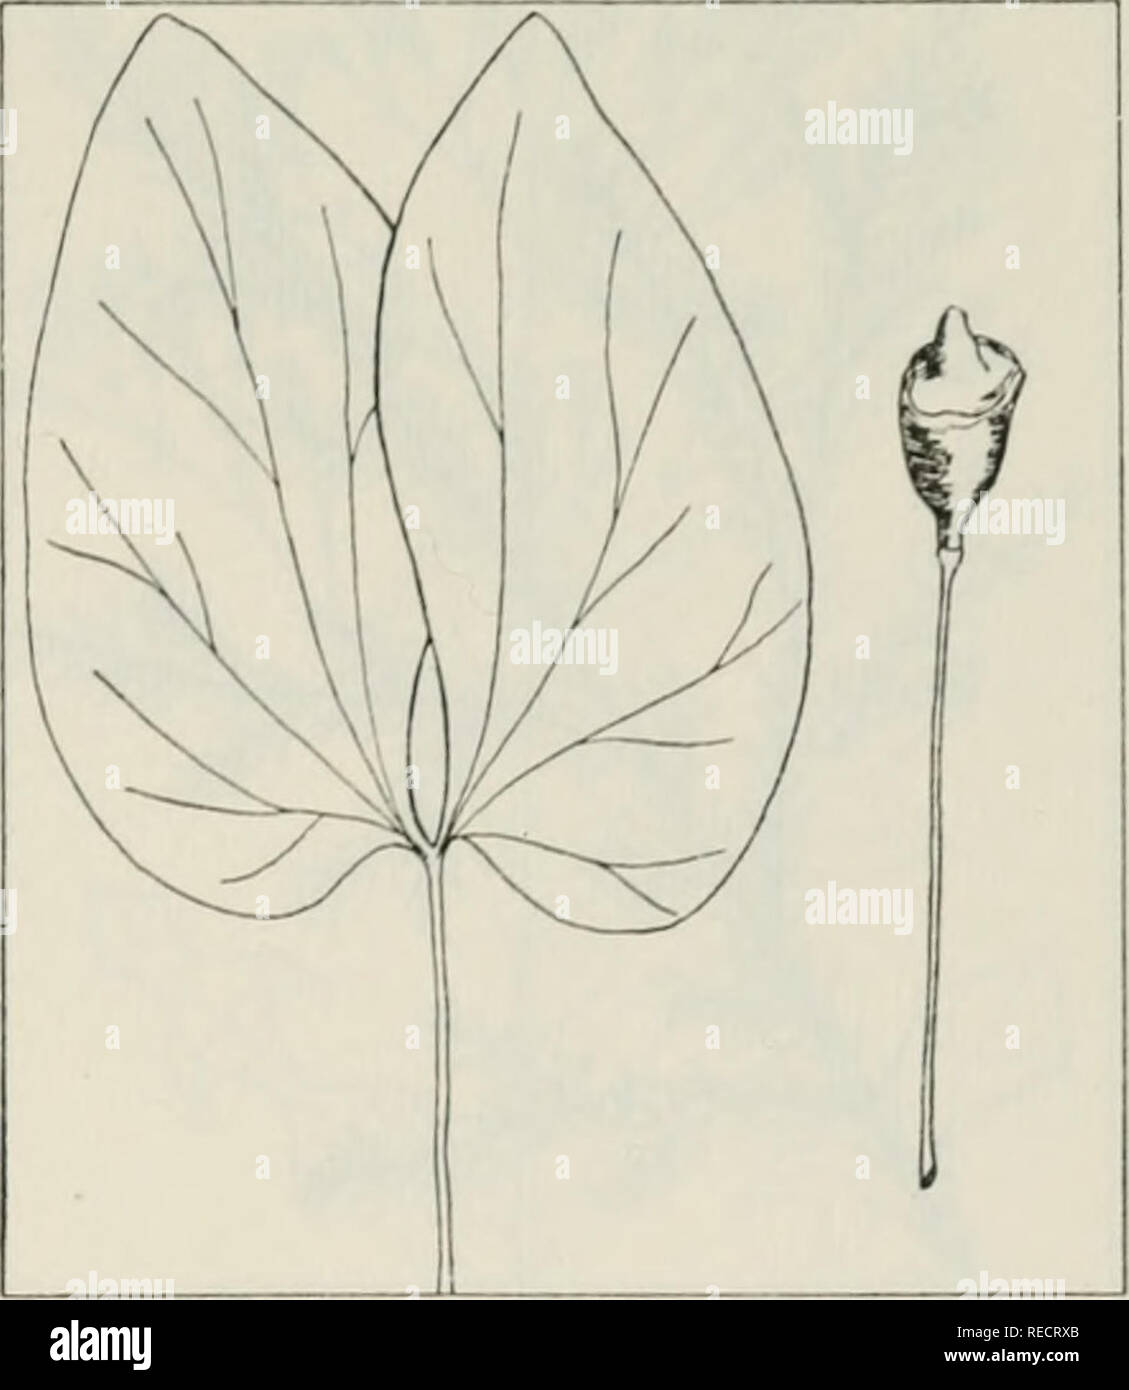 . The drug plants of Illinois. Botany, Medical; Botany. Tehon THE DRUG PLANTS OF ILLINOIS 69 JEFFERSONIA DIPHYLLA (L.) Pers. Twinleaf, rheumatism root, hel- met pod, yellow-root. Berberidaceae.— A stemless, smooth herb 6 to 18 inches tall, perennial; rootstock horizontal, somewhat fleshy, thick, knotty, yellow-brown, with numerous matted, fibrous roots; leaves arising directly from the rootstock, long- petioled, 3 to 6 inches long, glaucous be- neath, divided into 2 broad, somewhat semicircular, sometimes lobed parts; flowers white, about 1 inch wide, solitary at the ends of flowering stems 6  Stock Photo